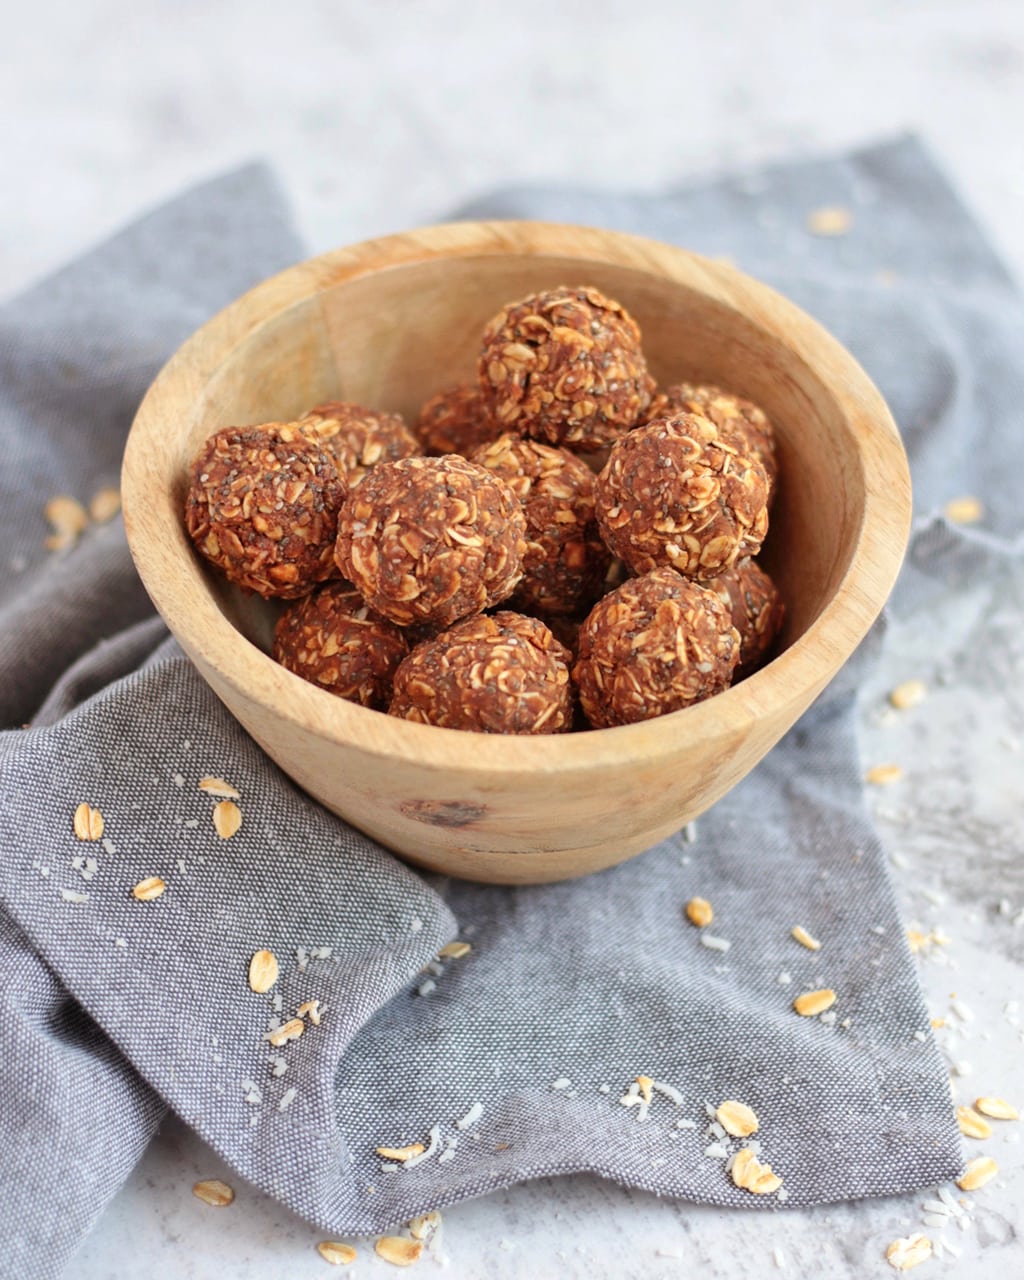 Chocolate Peanut Butter Bliss Balls in a bowl on a grey napkin